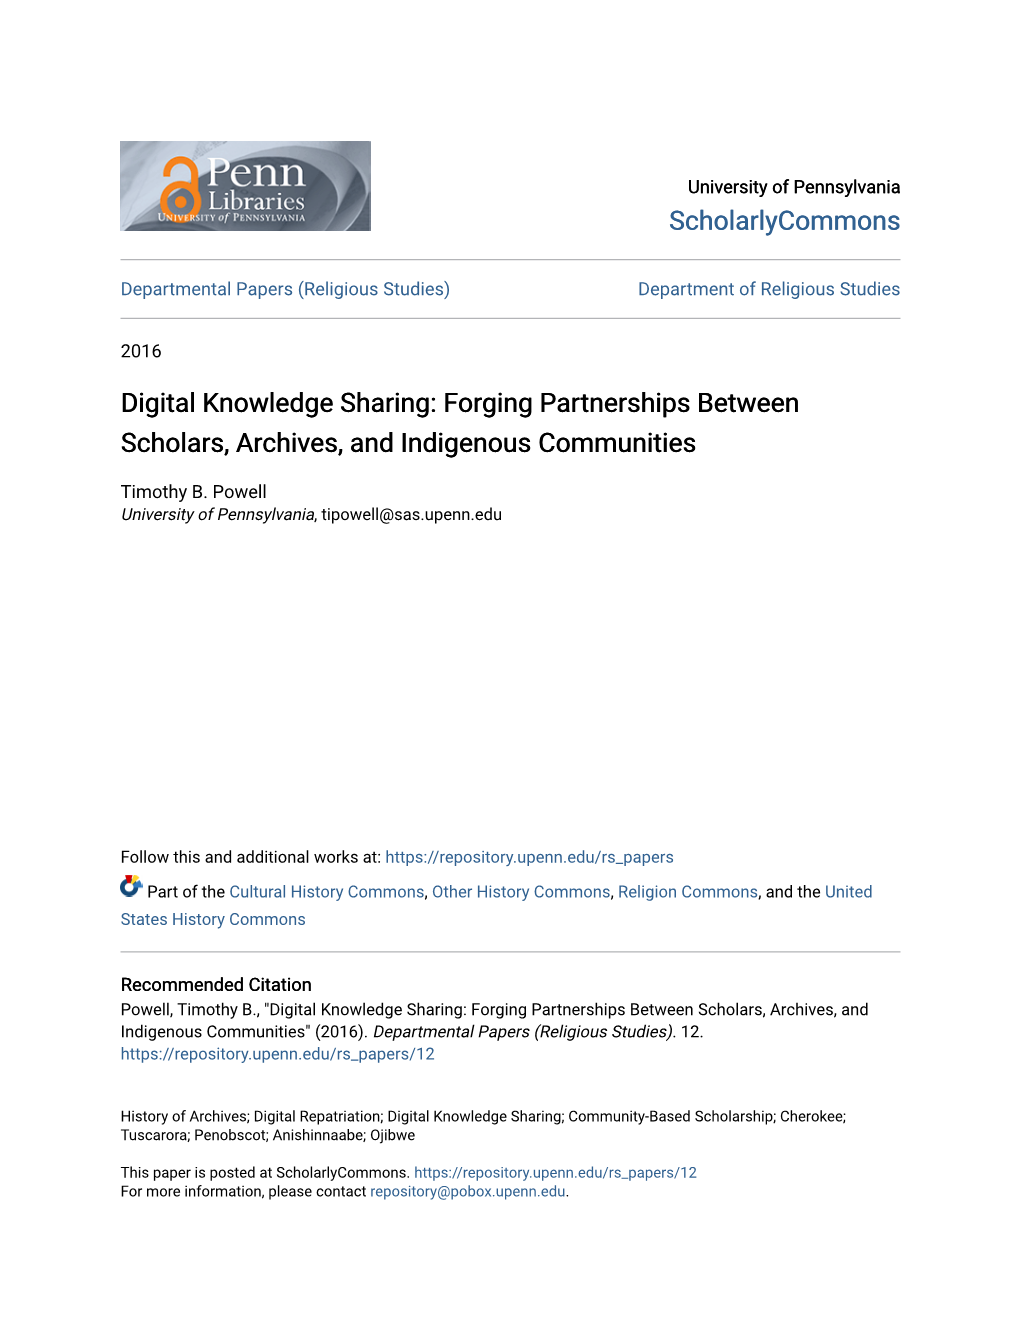 Digital Knowledge Sharing: Forging Partnerships Between Scholars, Archives, and Indigenous Communities